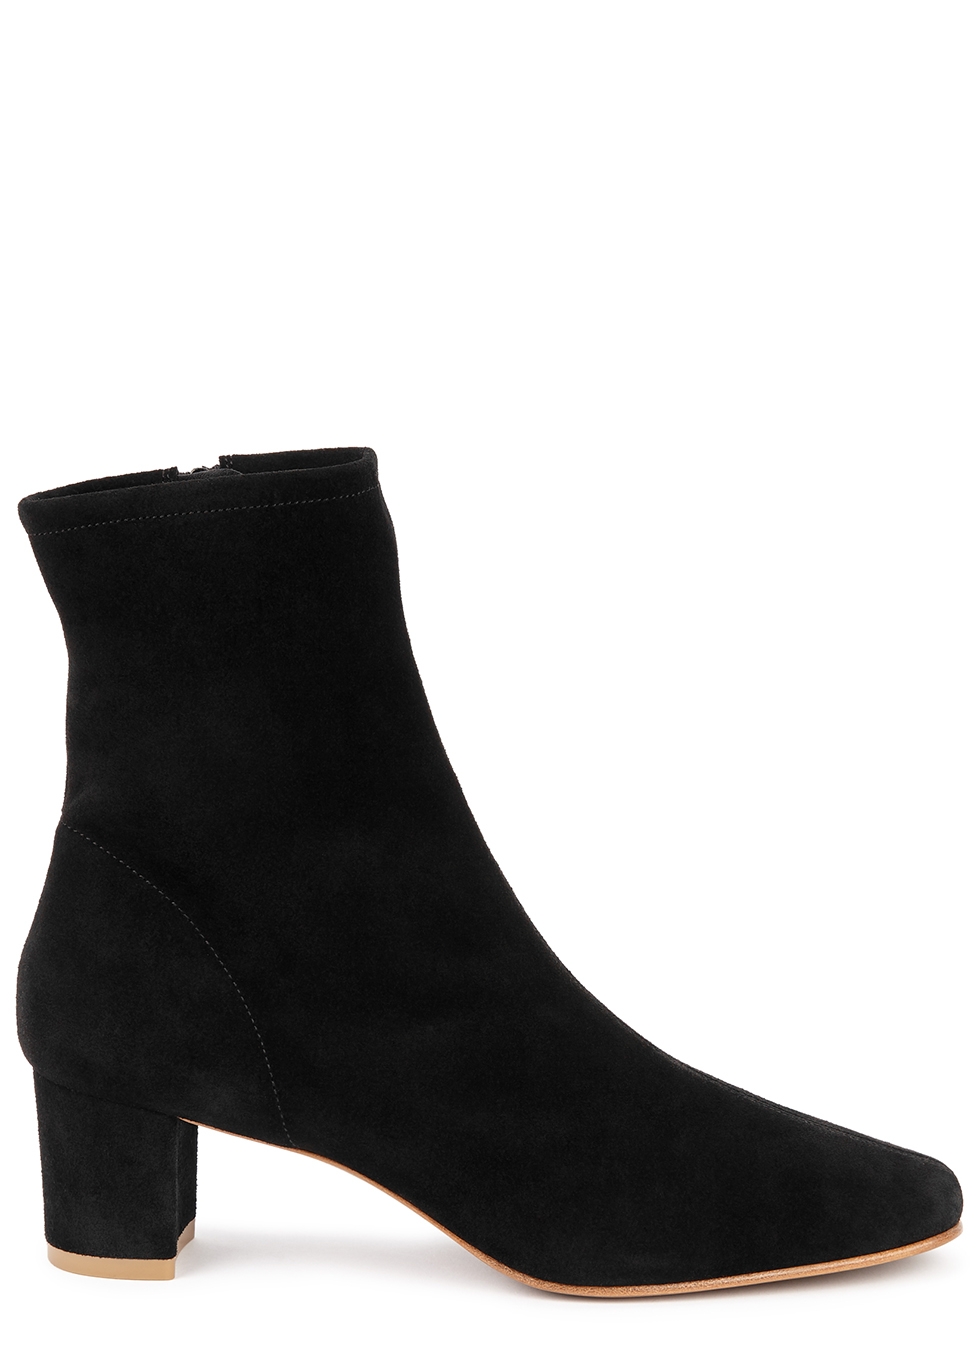 Sofia 50 black suede ankle boots